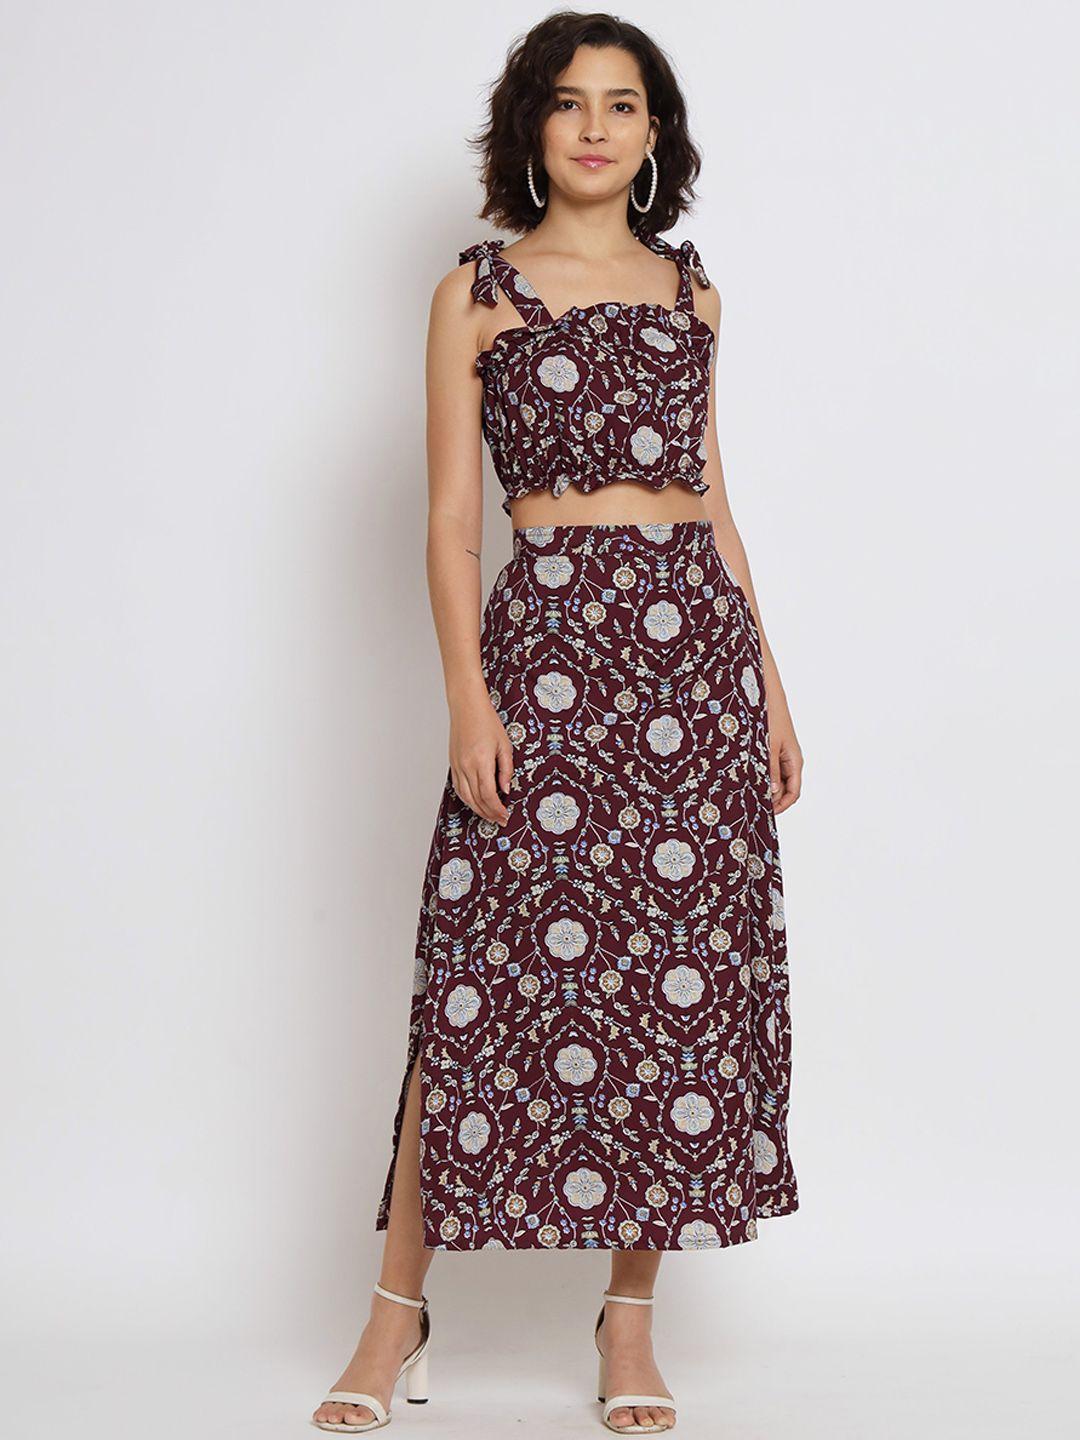 kalini floral printed top with skirt co-ords set